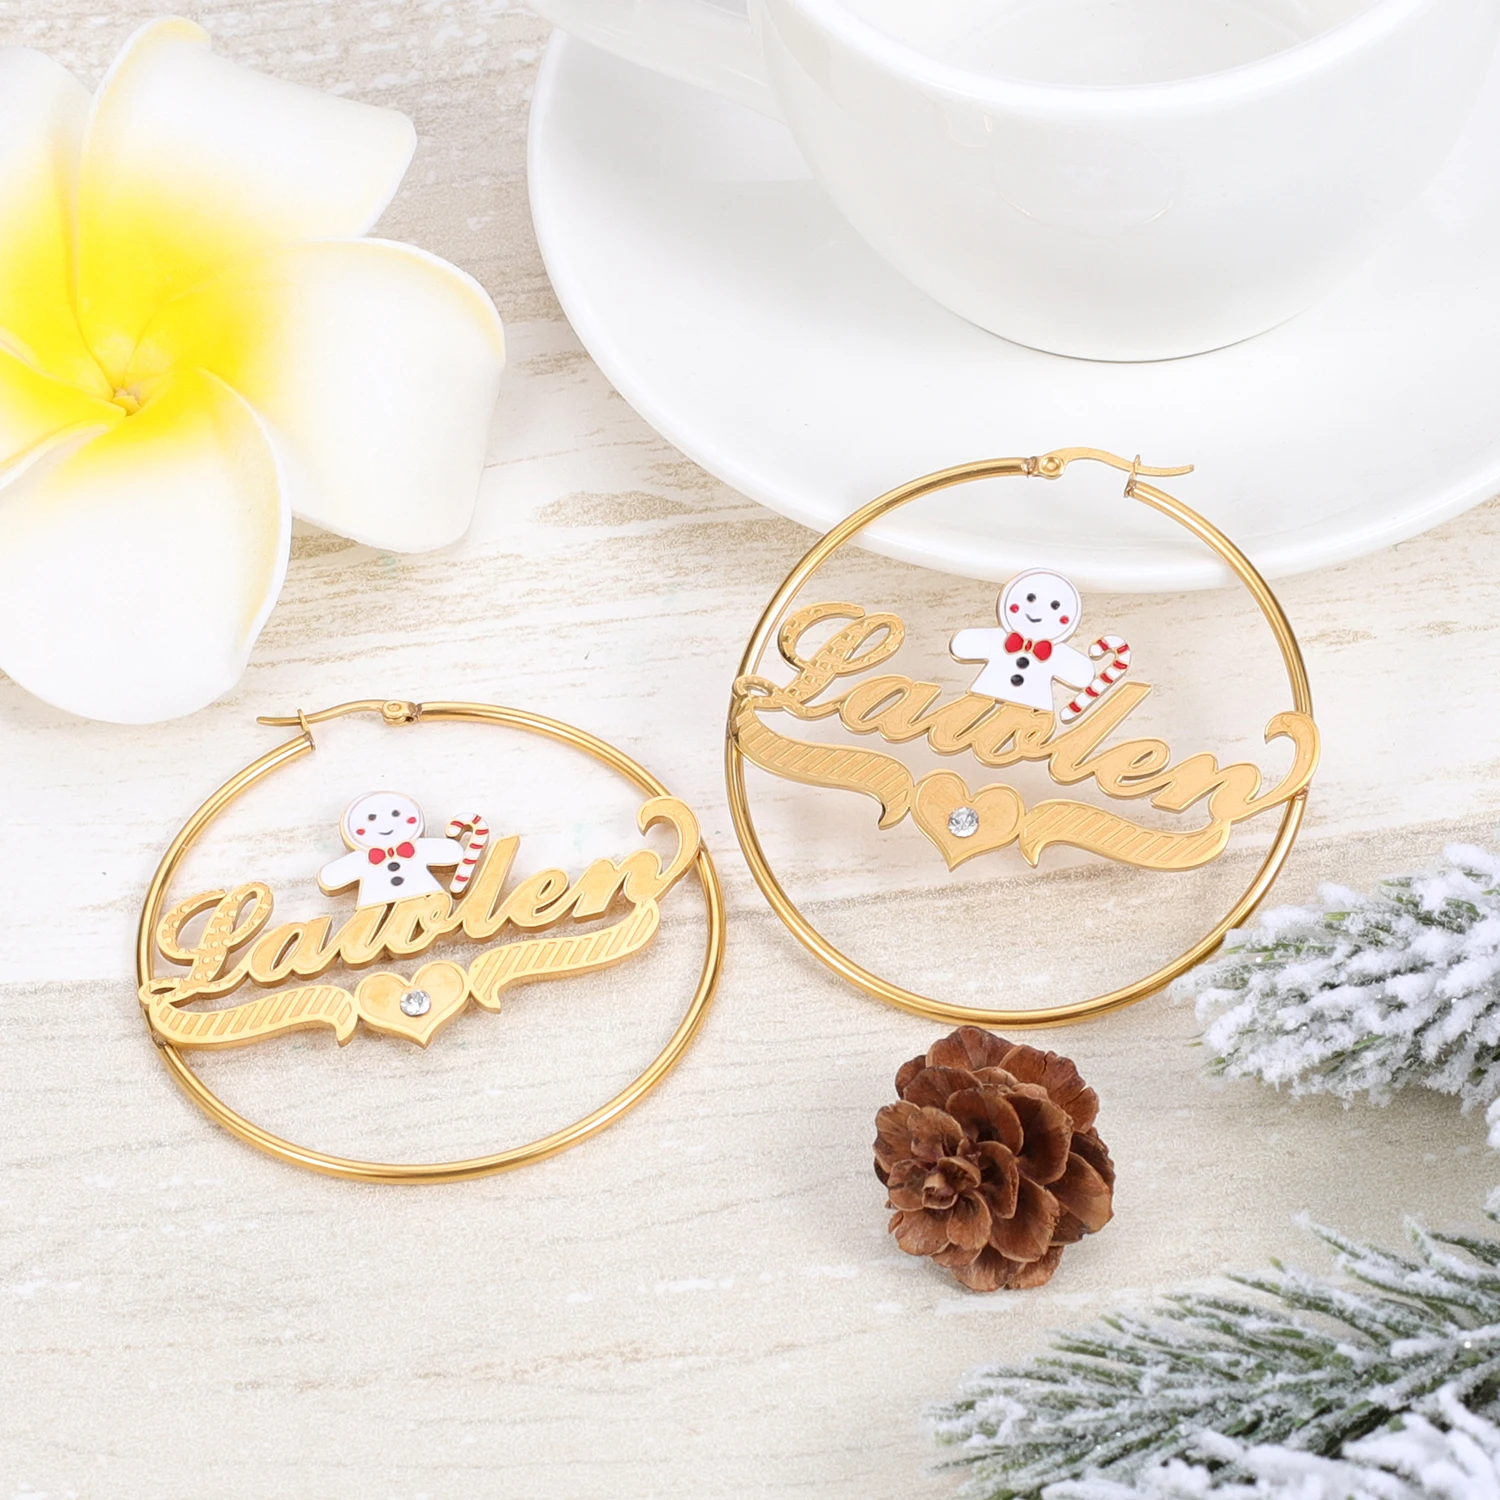 New Christmas Jewelry Customized Earrings Name Two Tone 18K Gold Plated Snowman Personalized Hoop Name Earrings for Women Girls earrings christmas tree rhinestone alloy earrings in silver size one size